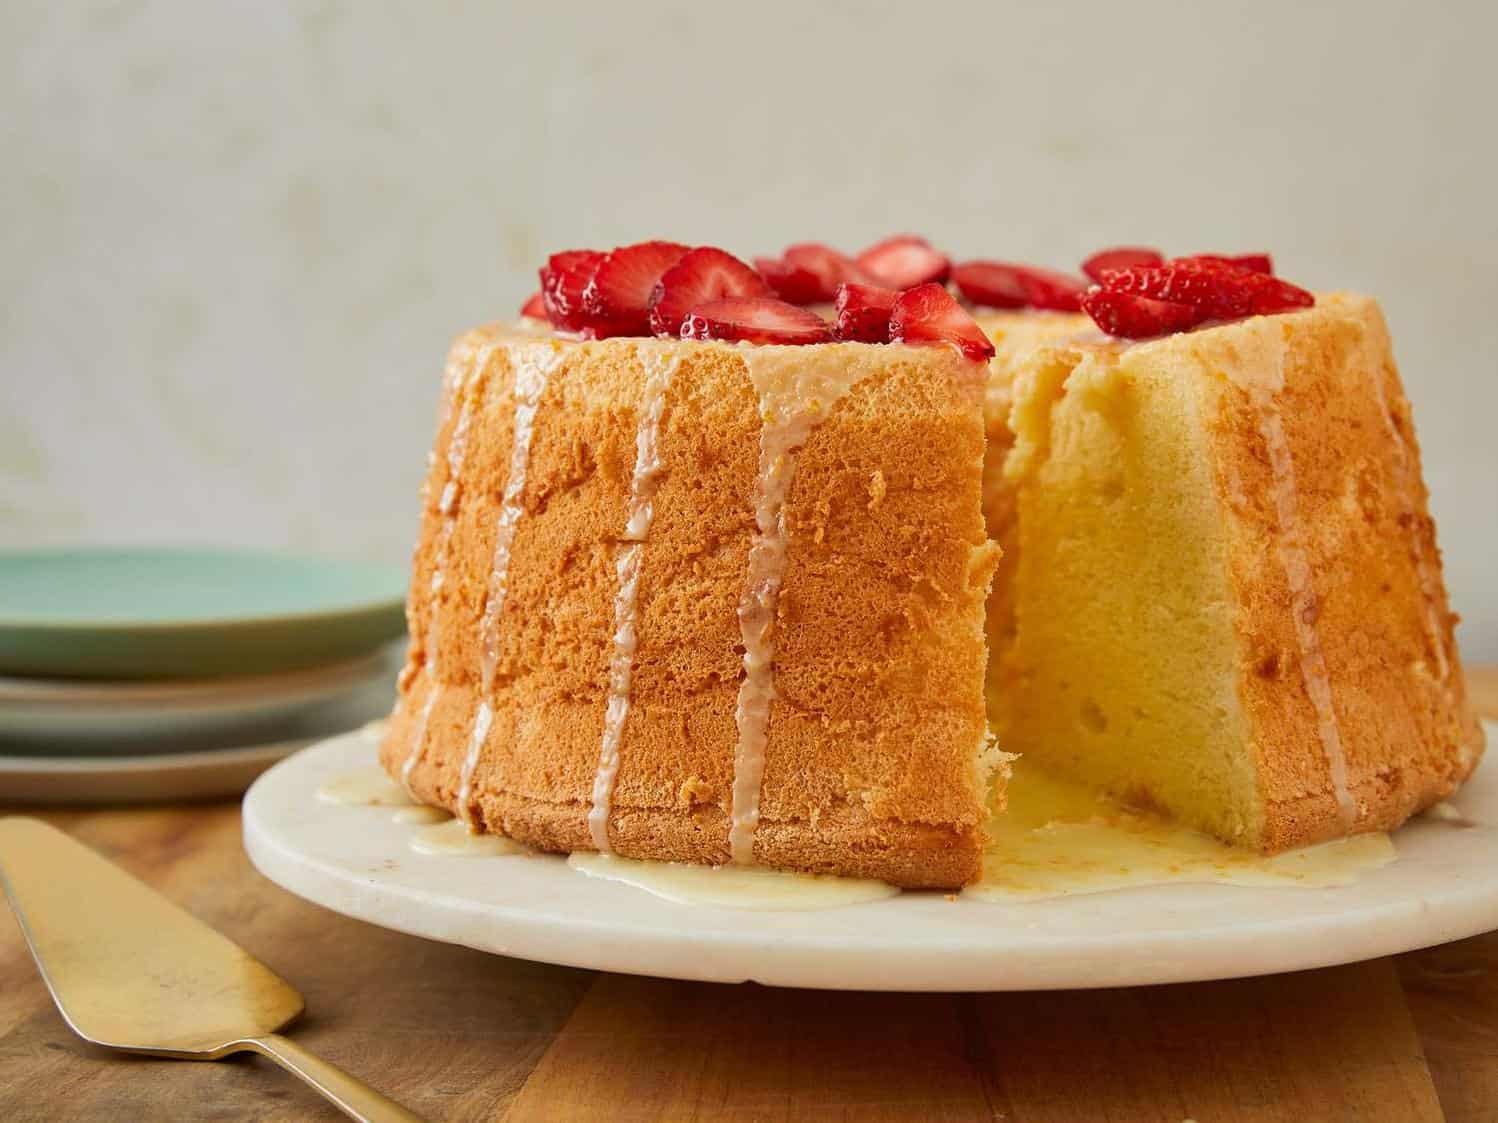  This cake is made with simple ingredients that you probably already have in your pantry.